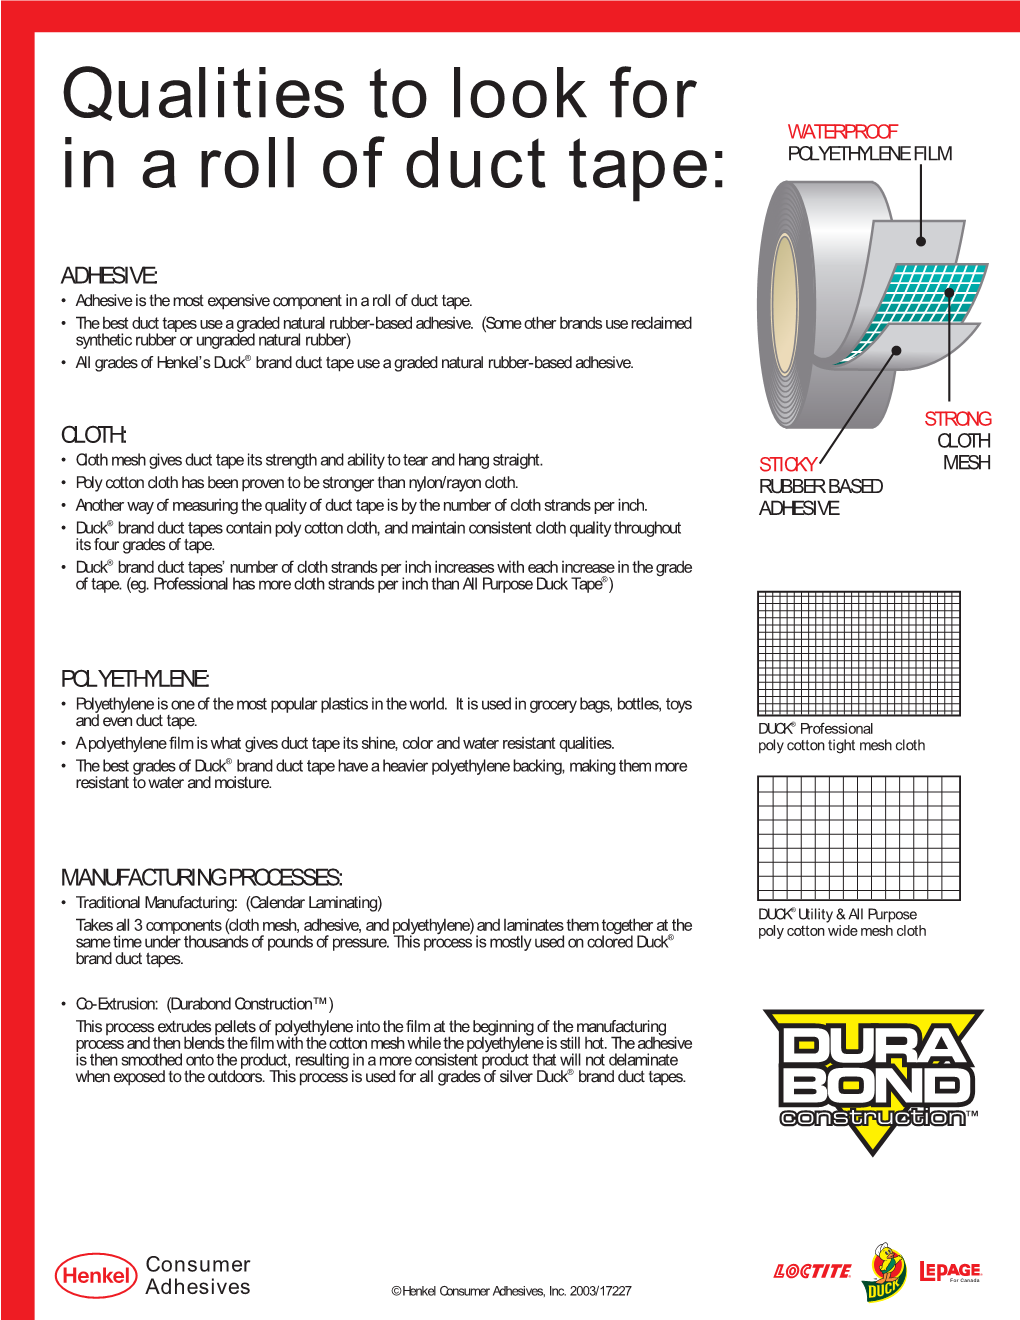 Qualities to Look for in a Roll of Duct Tape